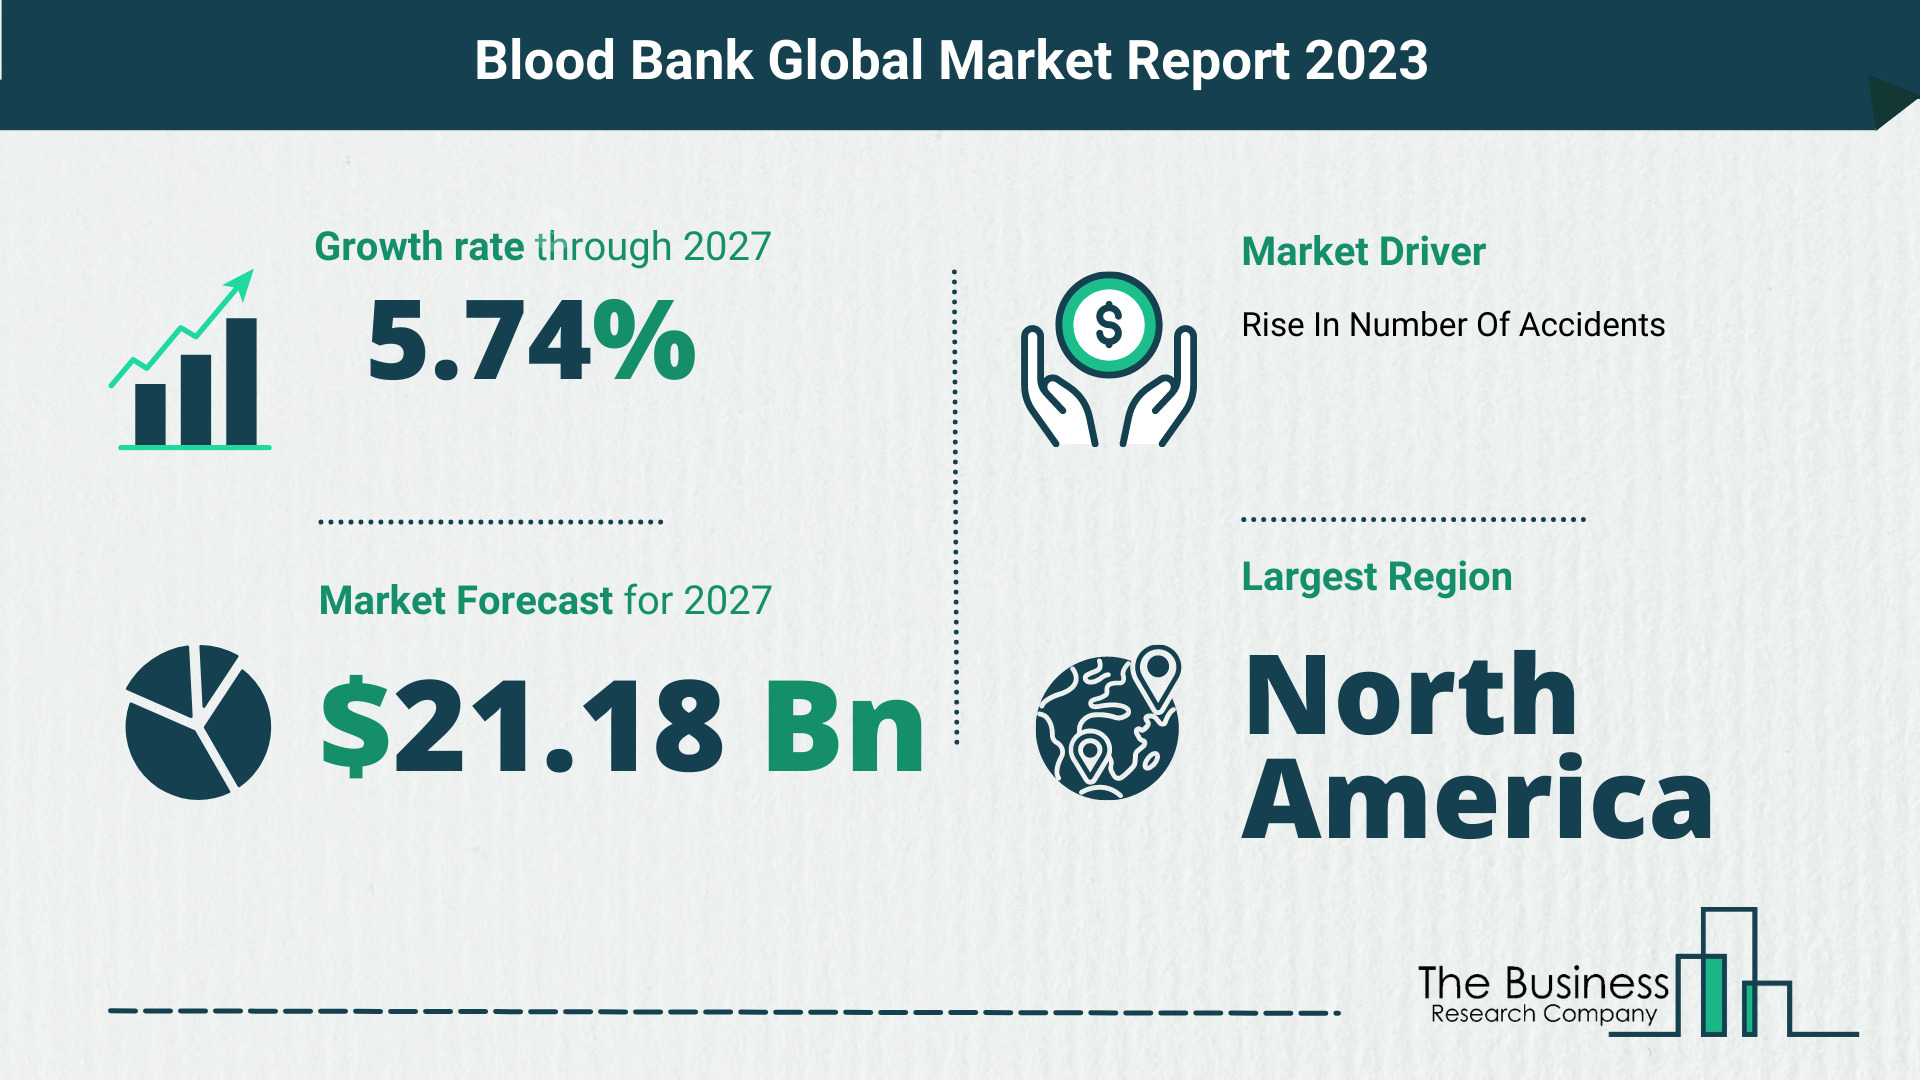 How Will The Blood Bank Market Globally Expand In 2023?